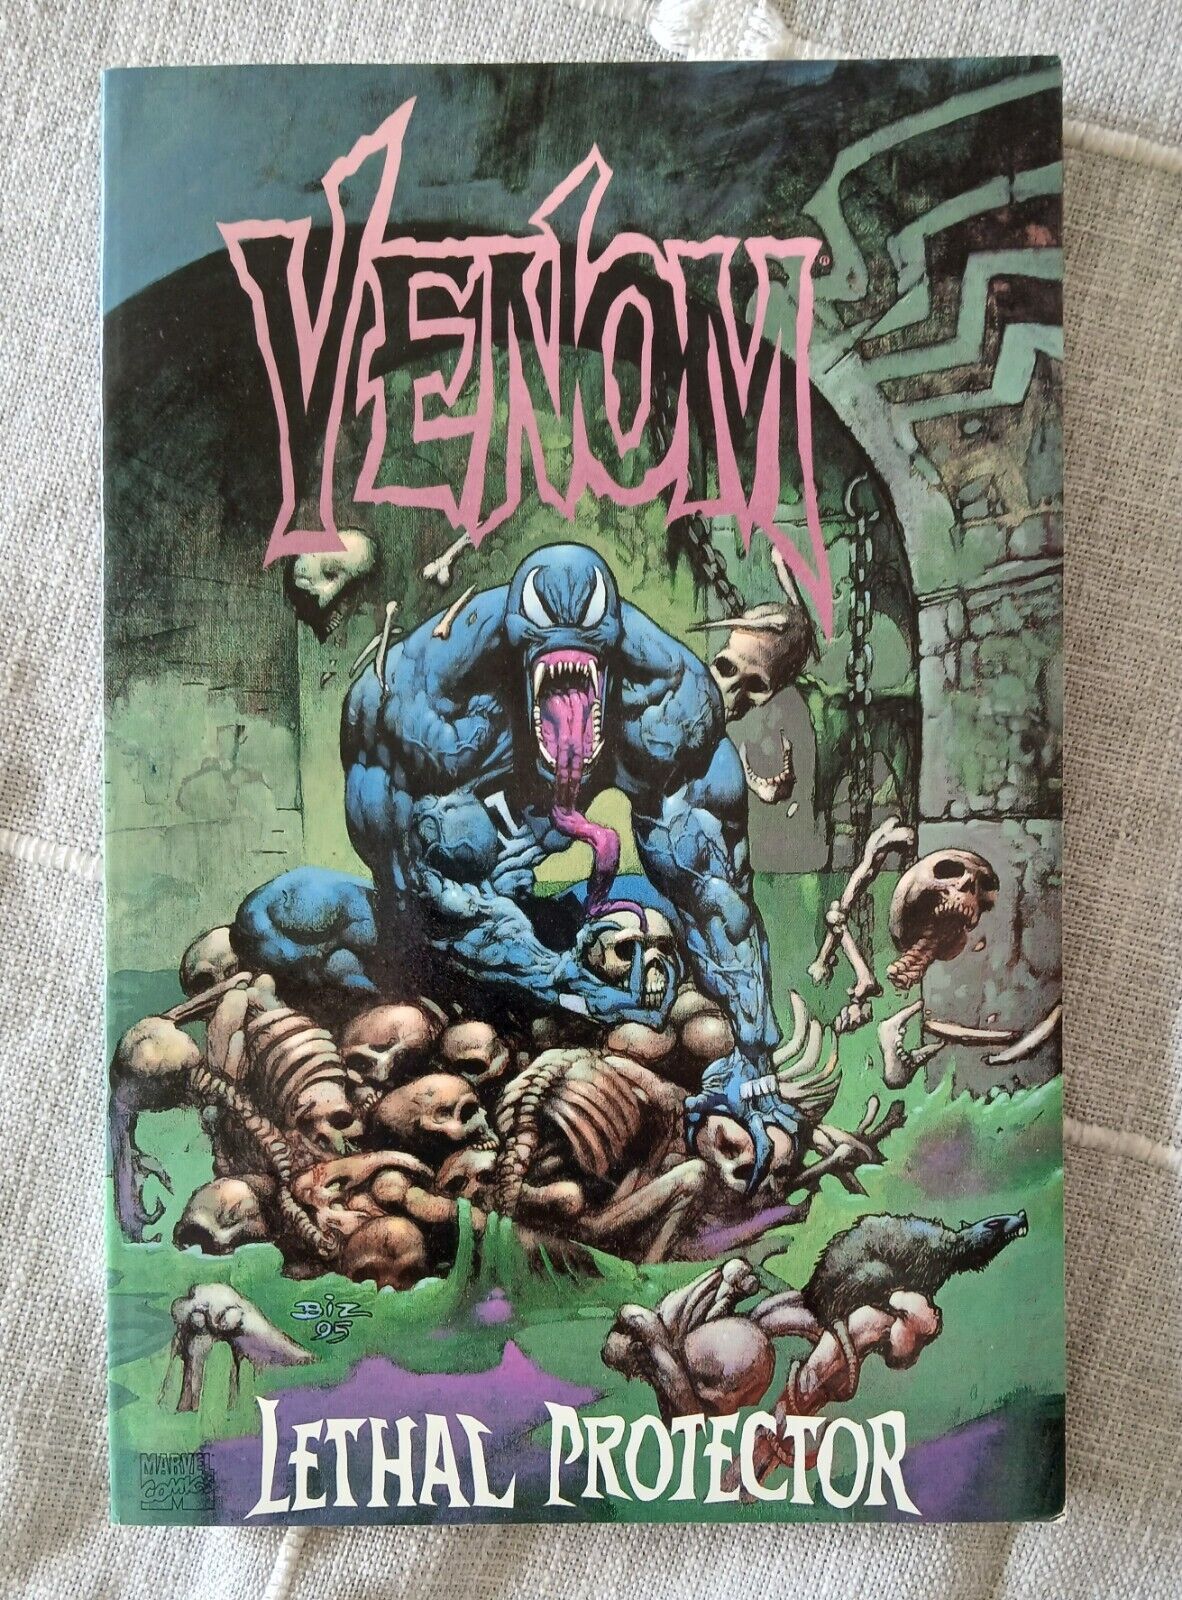 Venom Lethal Protector Direct Edition First Printing July 1995